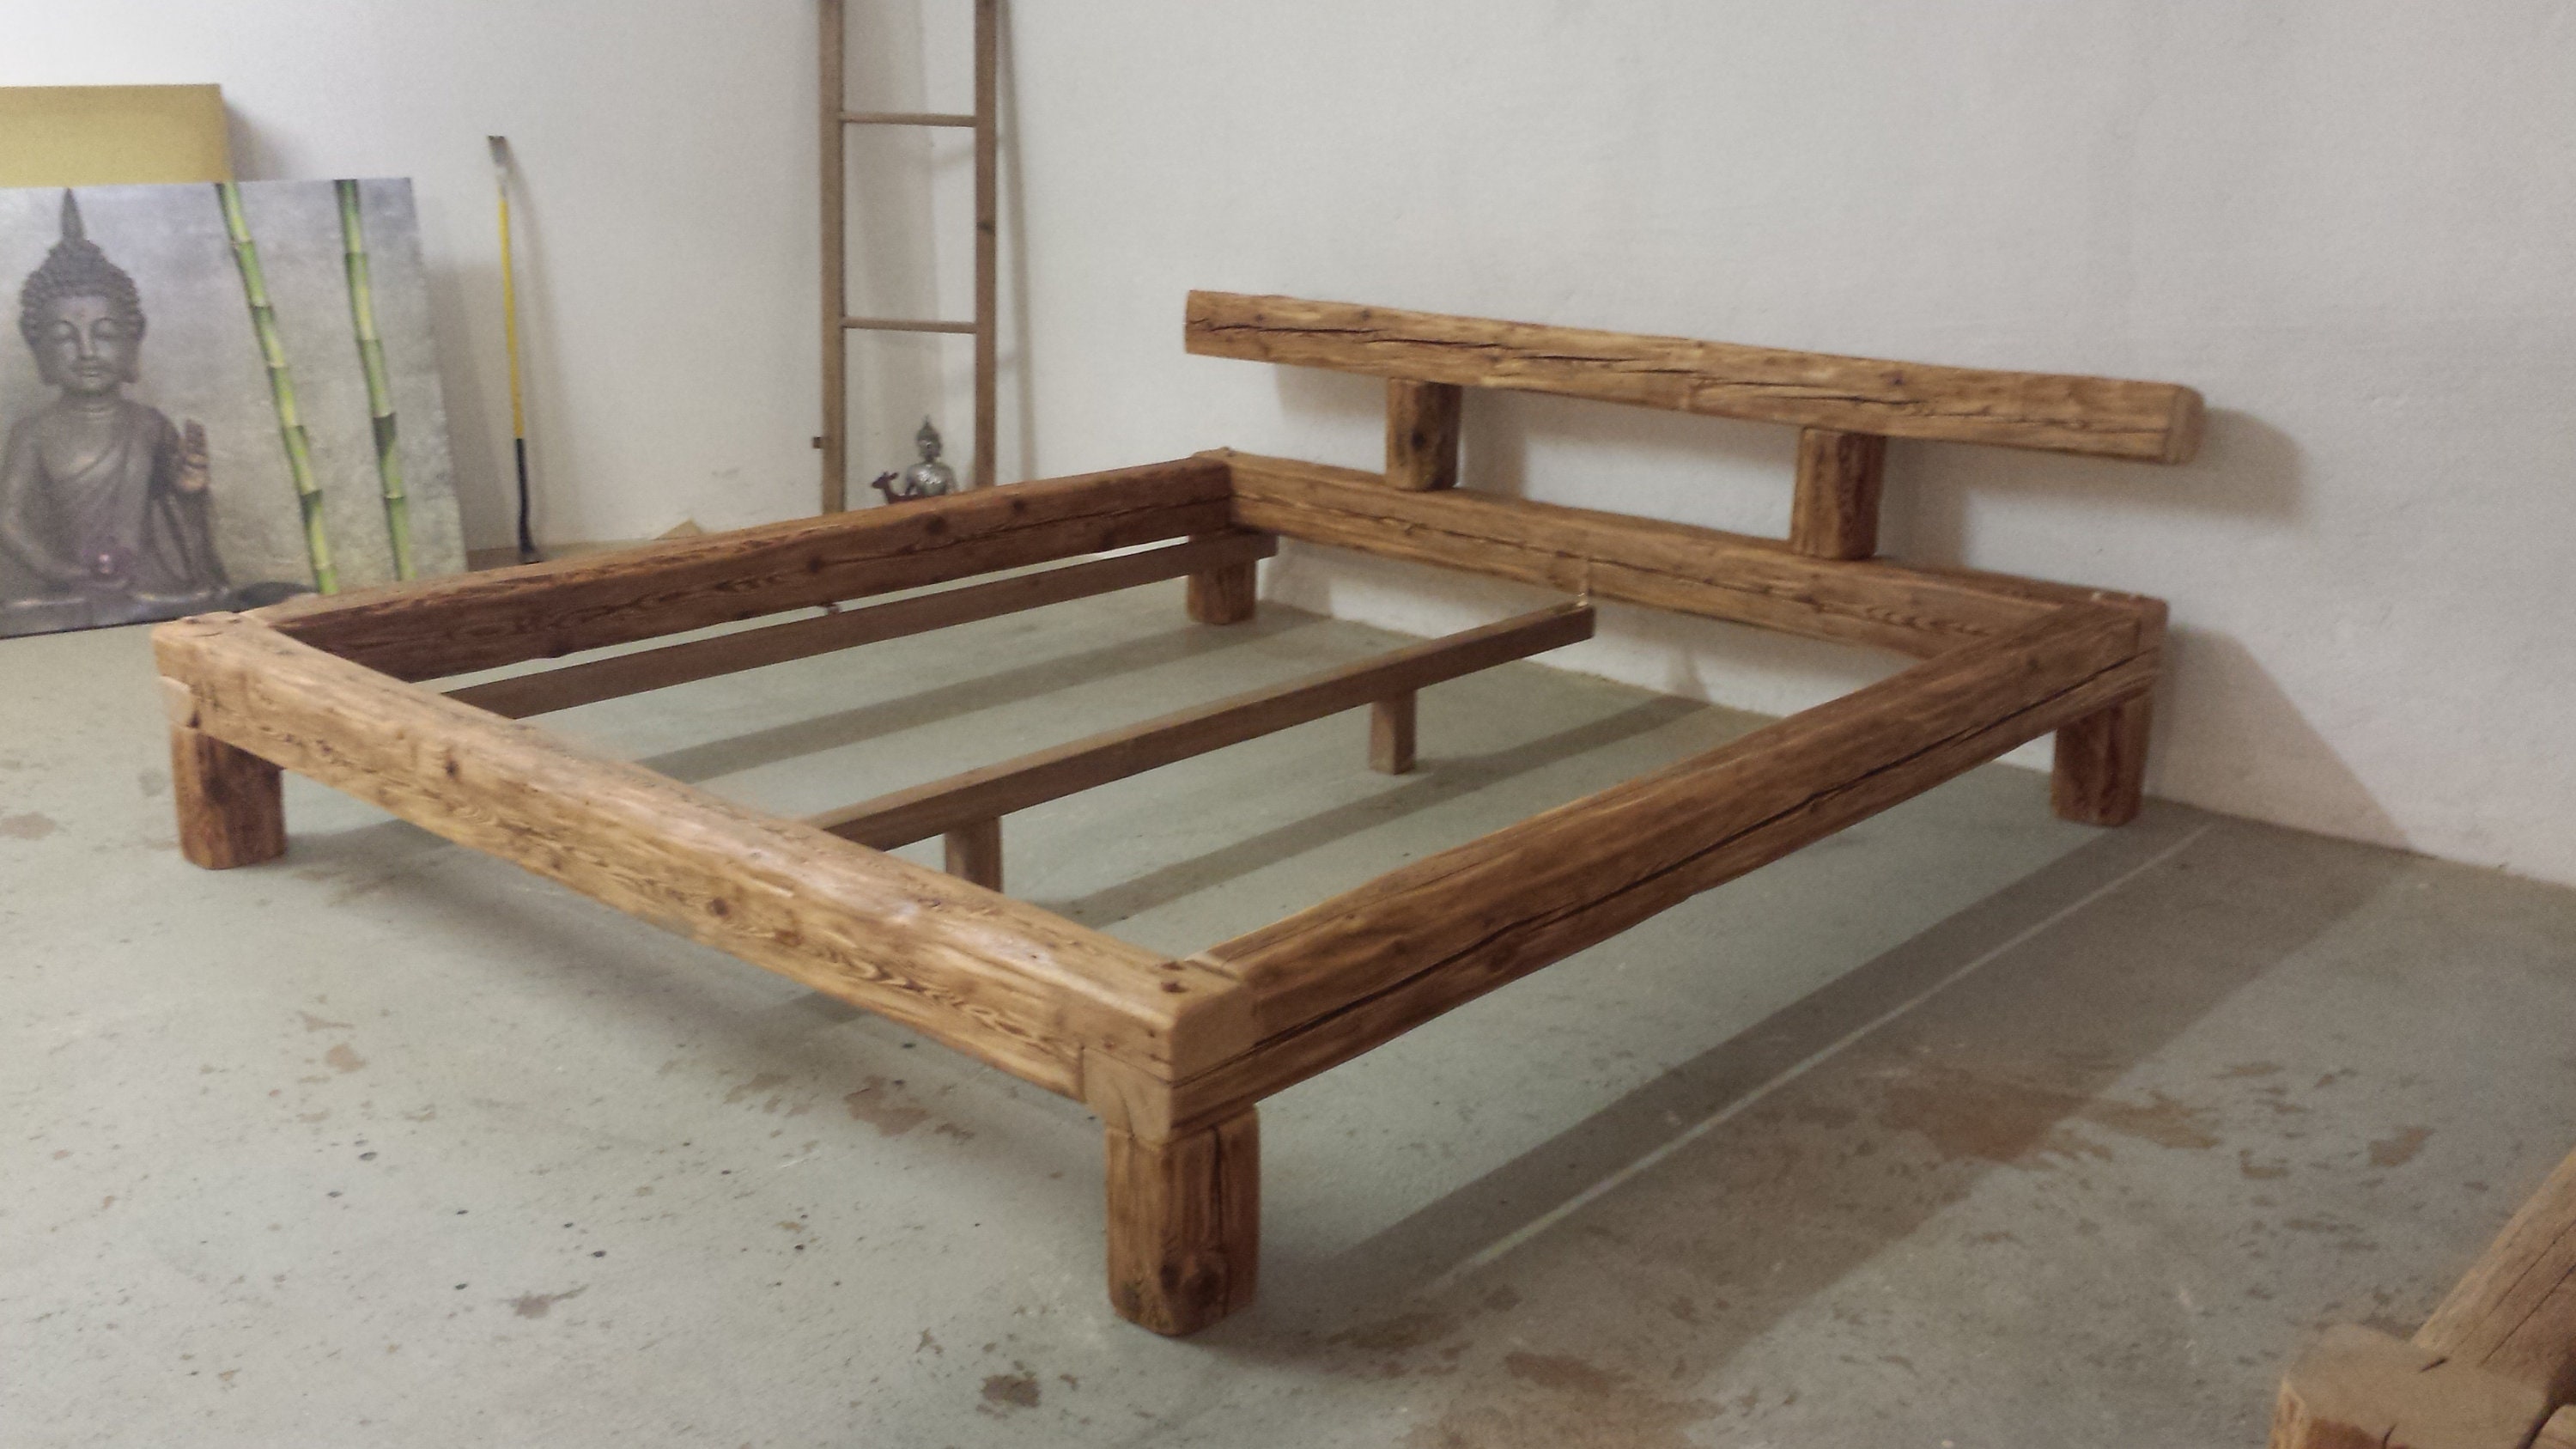 Wood Beam Bed 200 200 Cm Hand-chopped Wooden - Etsy